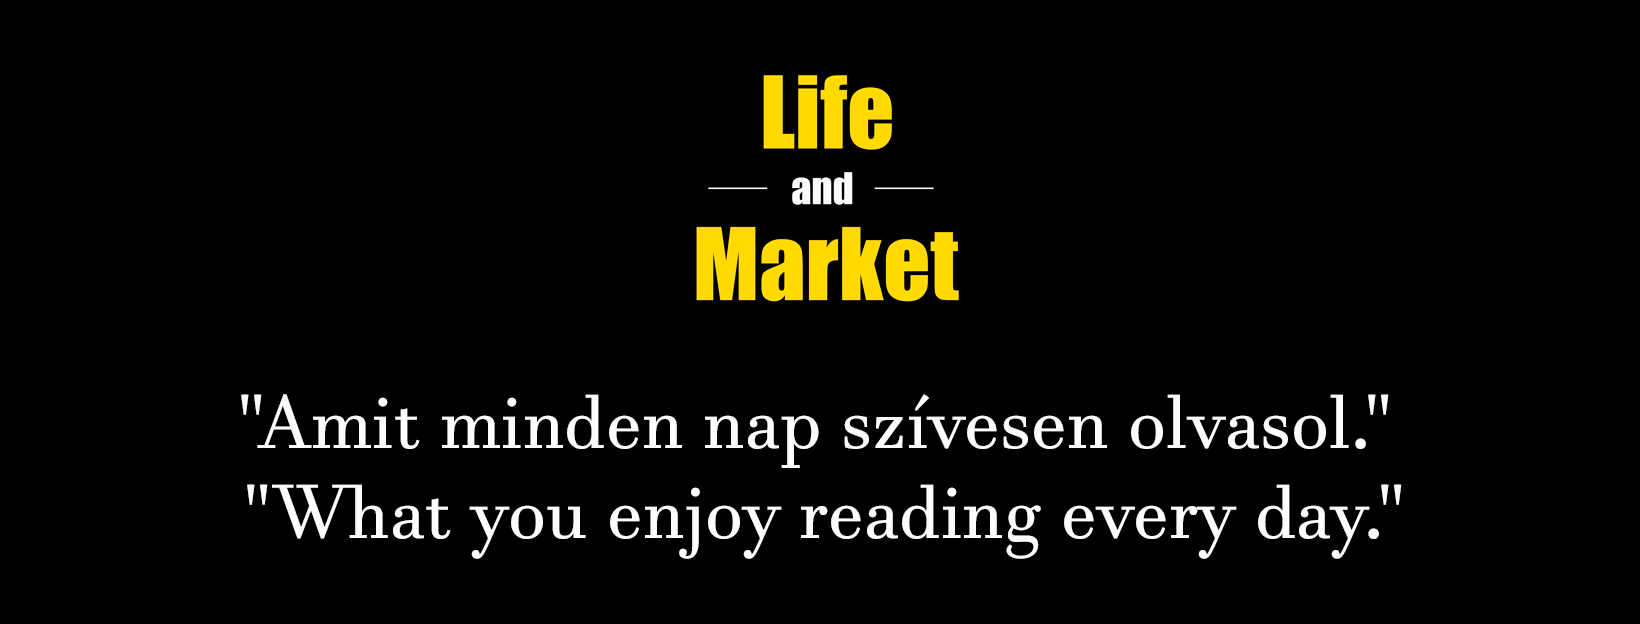 life and market